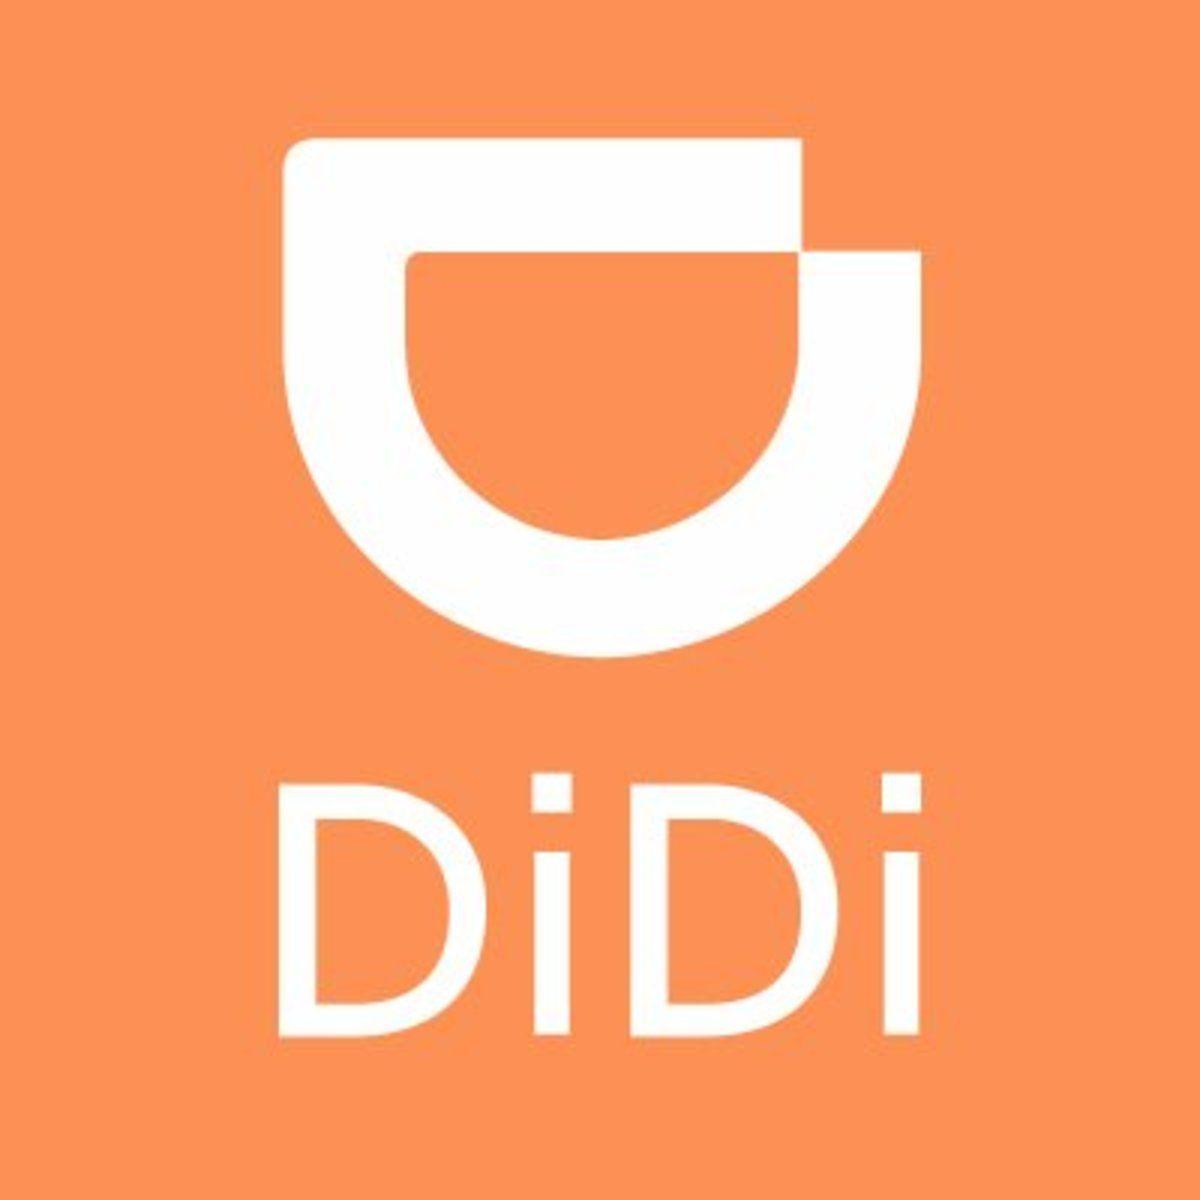 Chinese Didi Logo - The Booming Dockless Bike Share Sector And The Entry Of Didi Chuxing